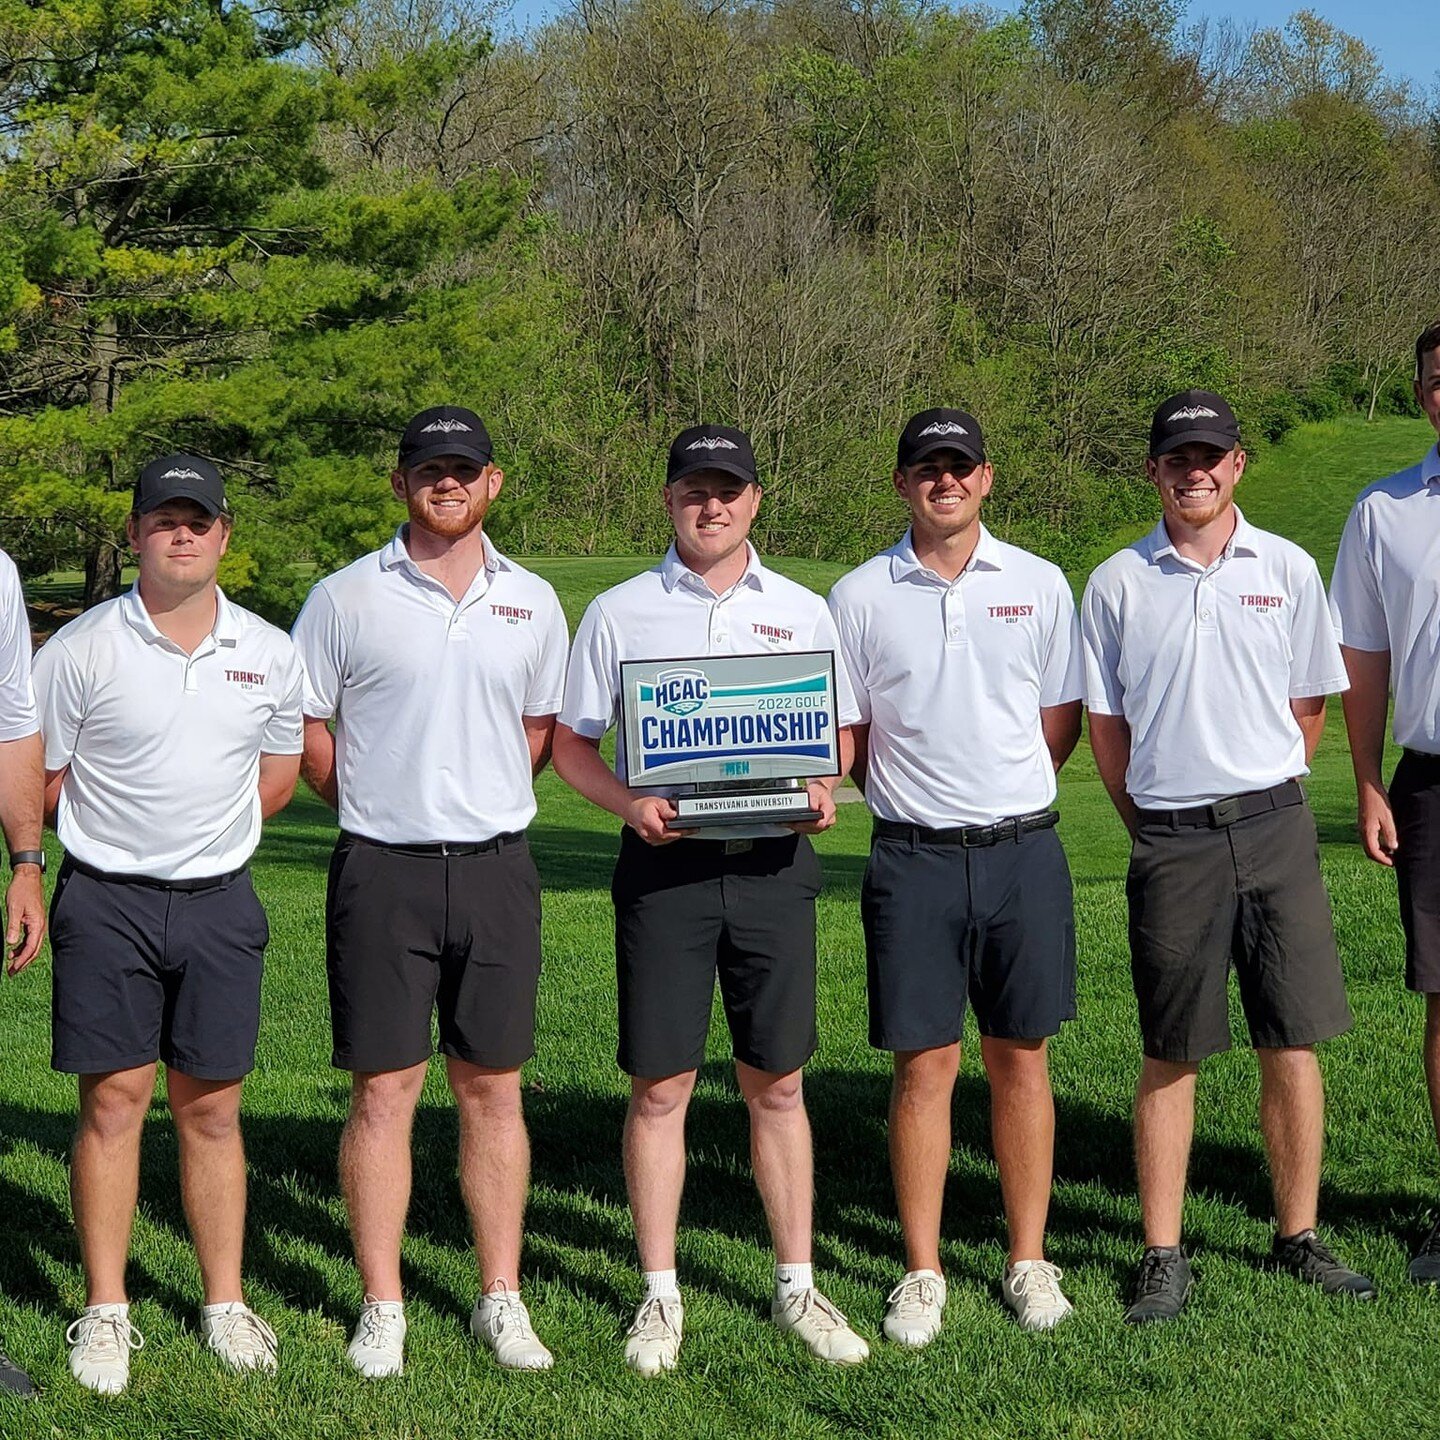 Congratulations!! Transylvania Men's Golf team punched their ticket to the National NCAA Golf Tournament in 2 weeks with winning their HCAC Conference Championship. Good luck Drew!